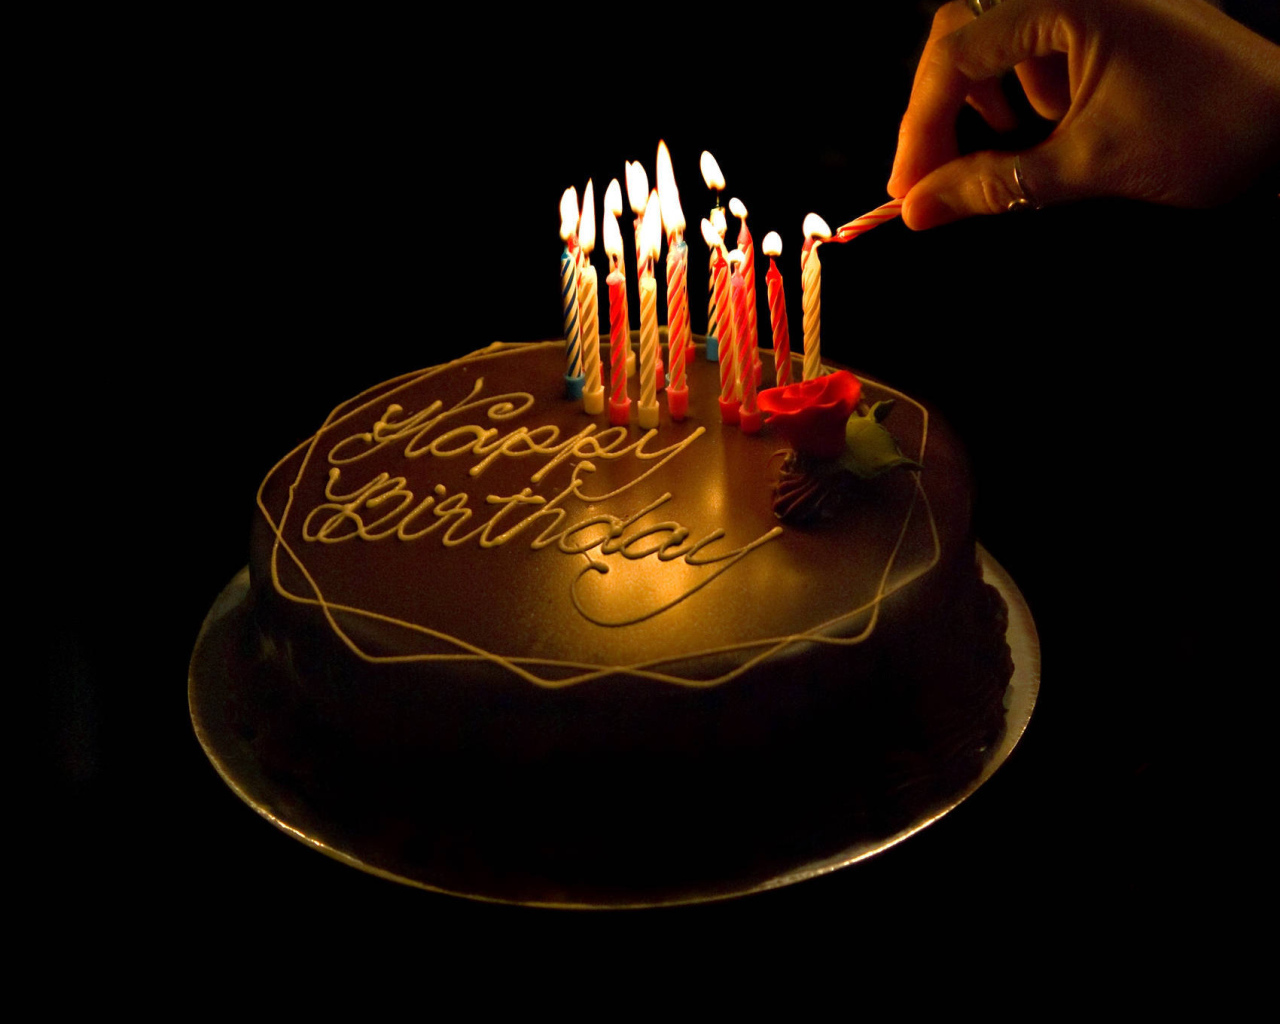 To light the candles on the cake on birthday